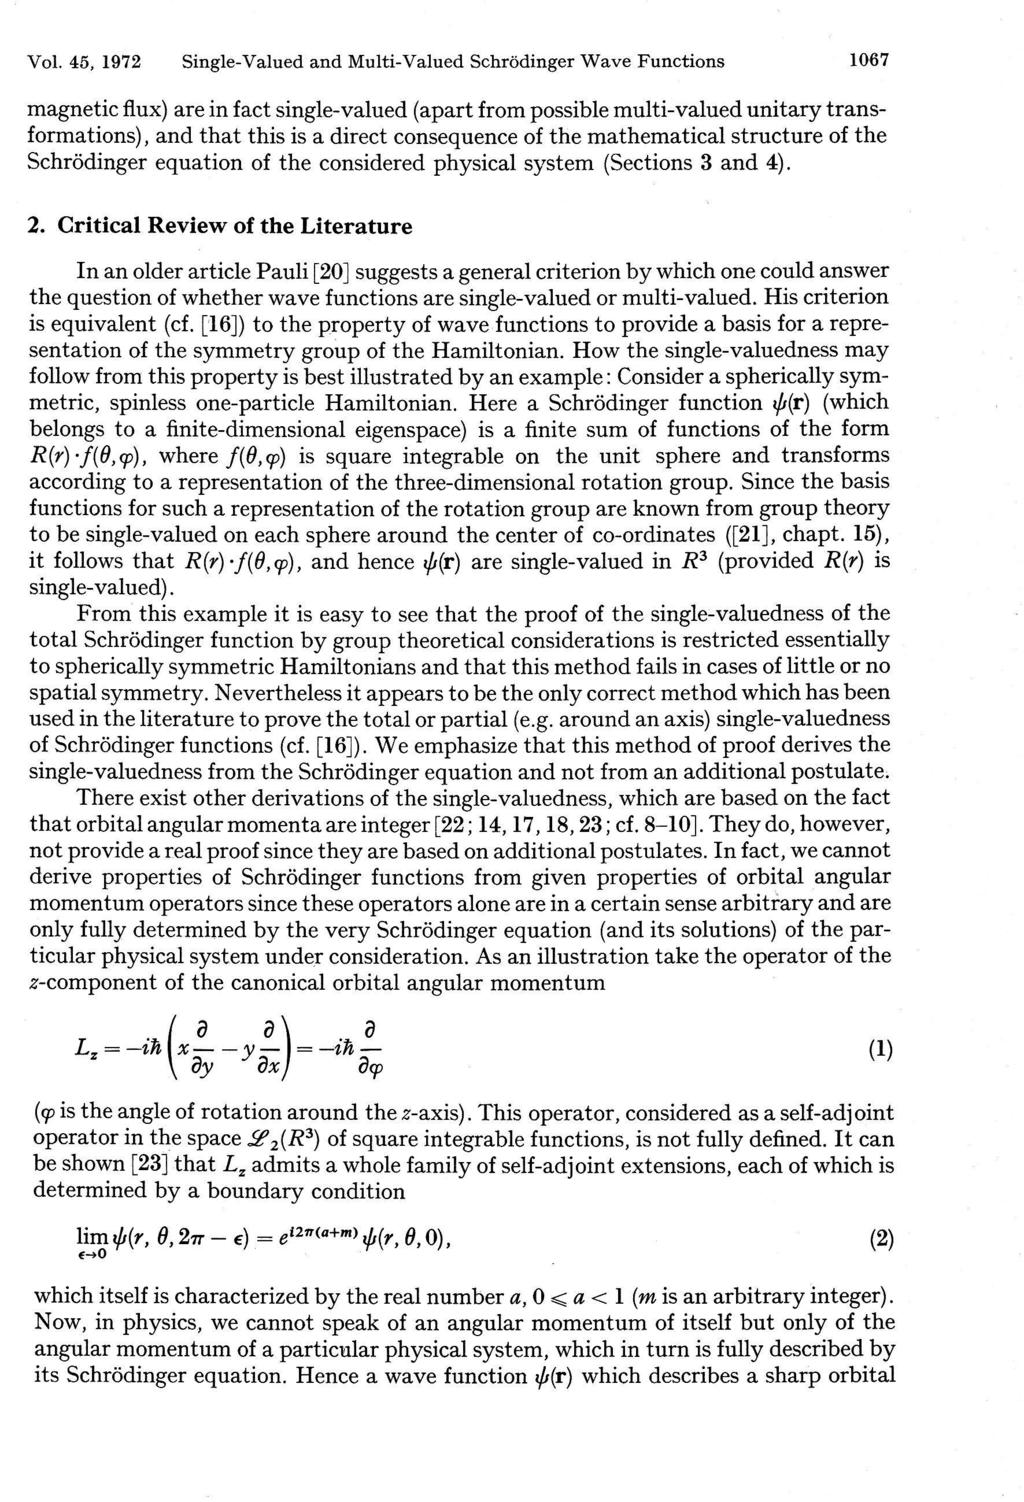 Vol. 45, 1972 Single-Valued and Multi-Valued Schrödinger Wave Functions 1067 magnetic flux) are in fact single-valued (apart from possible multi-valued unitary trans formations) and that this is a